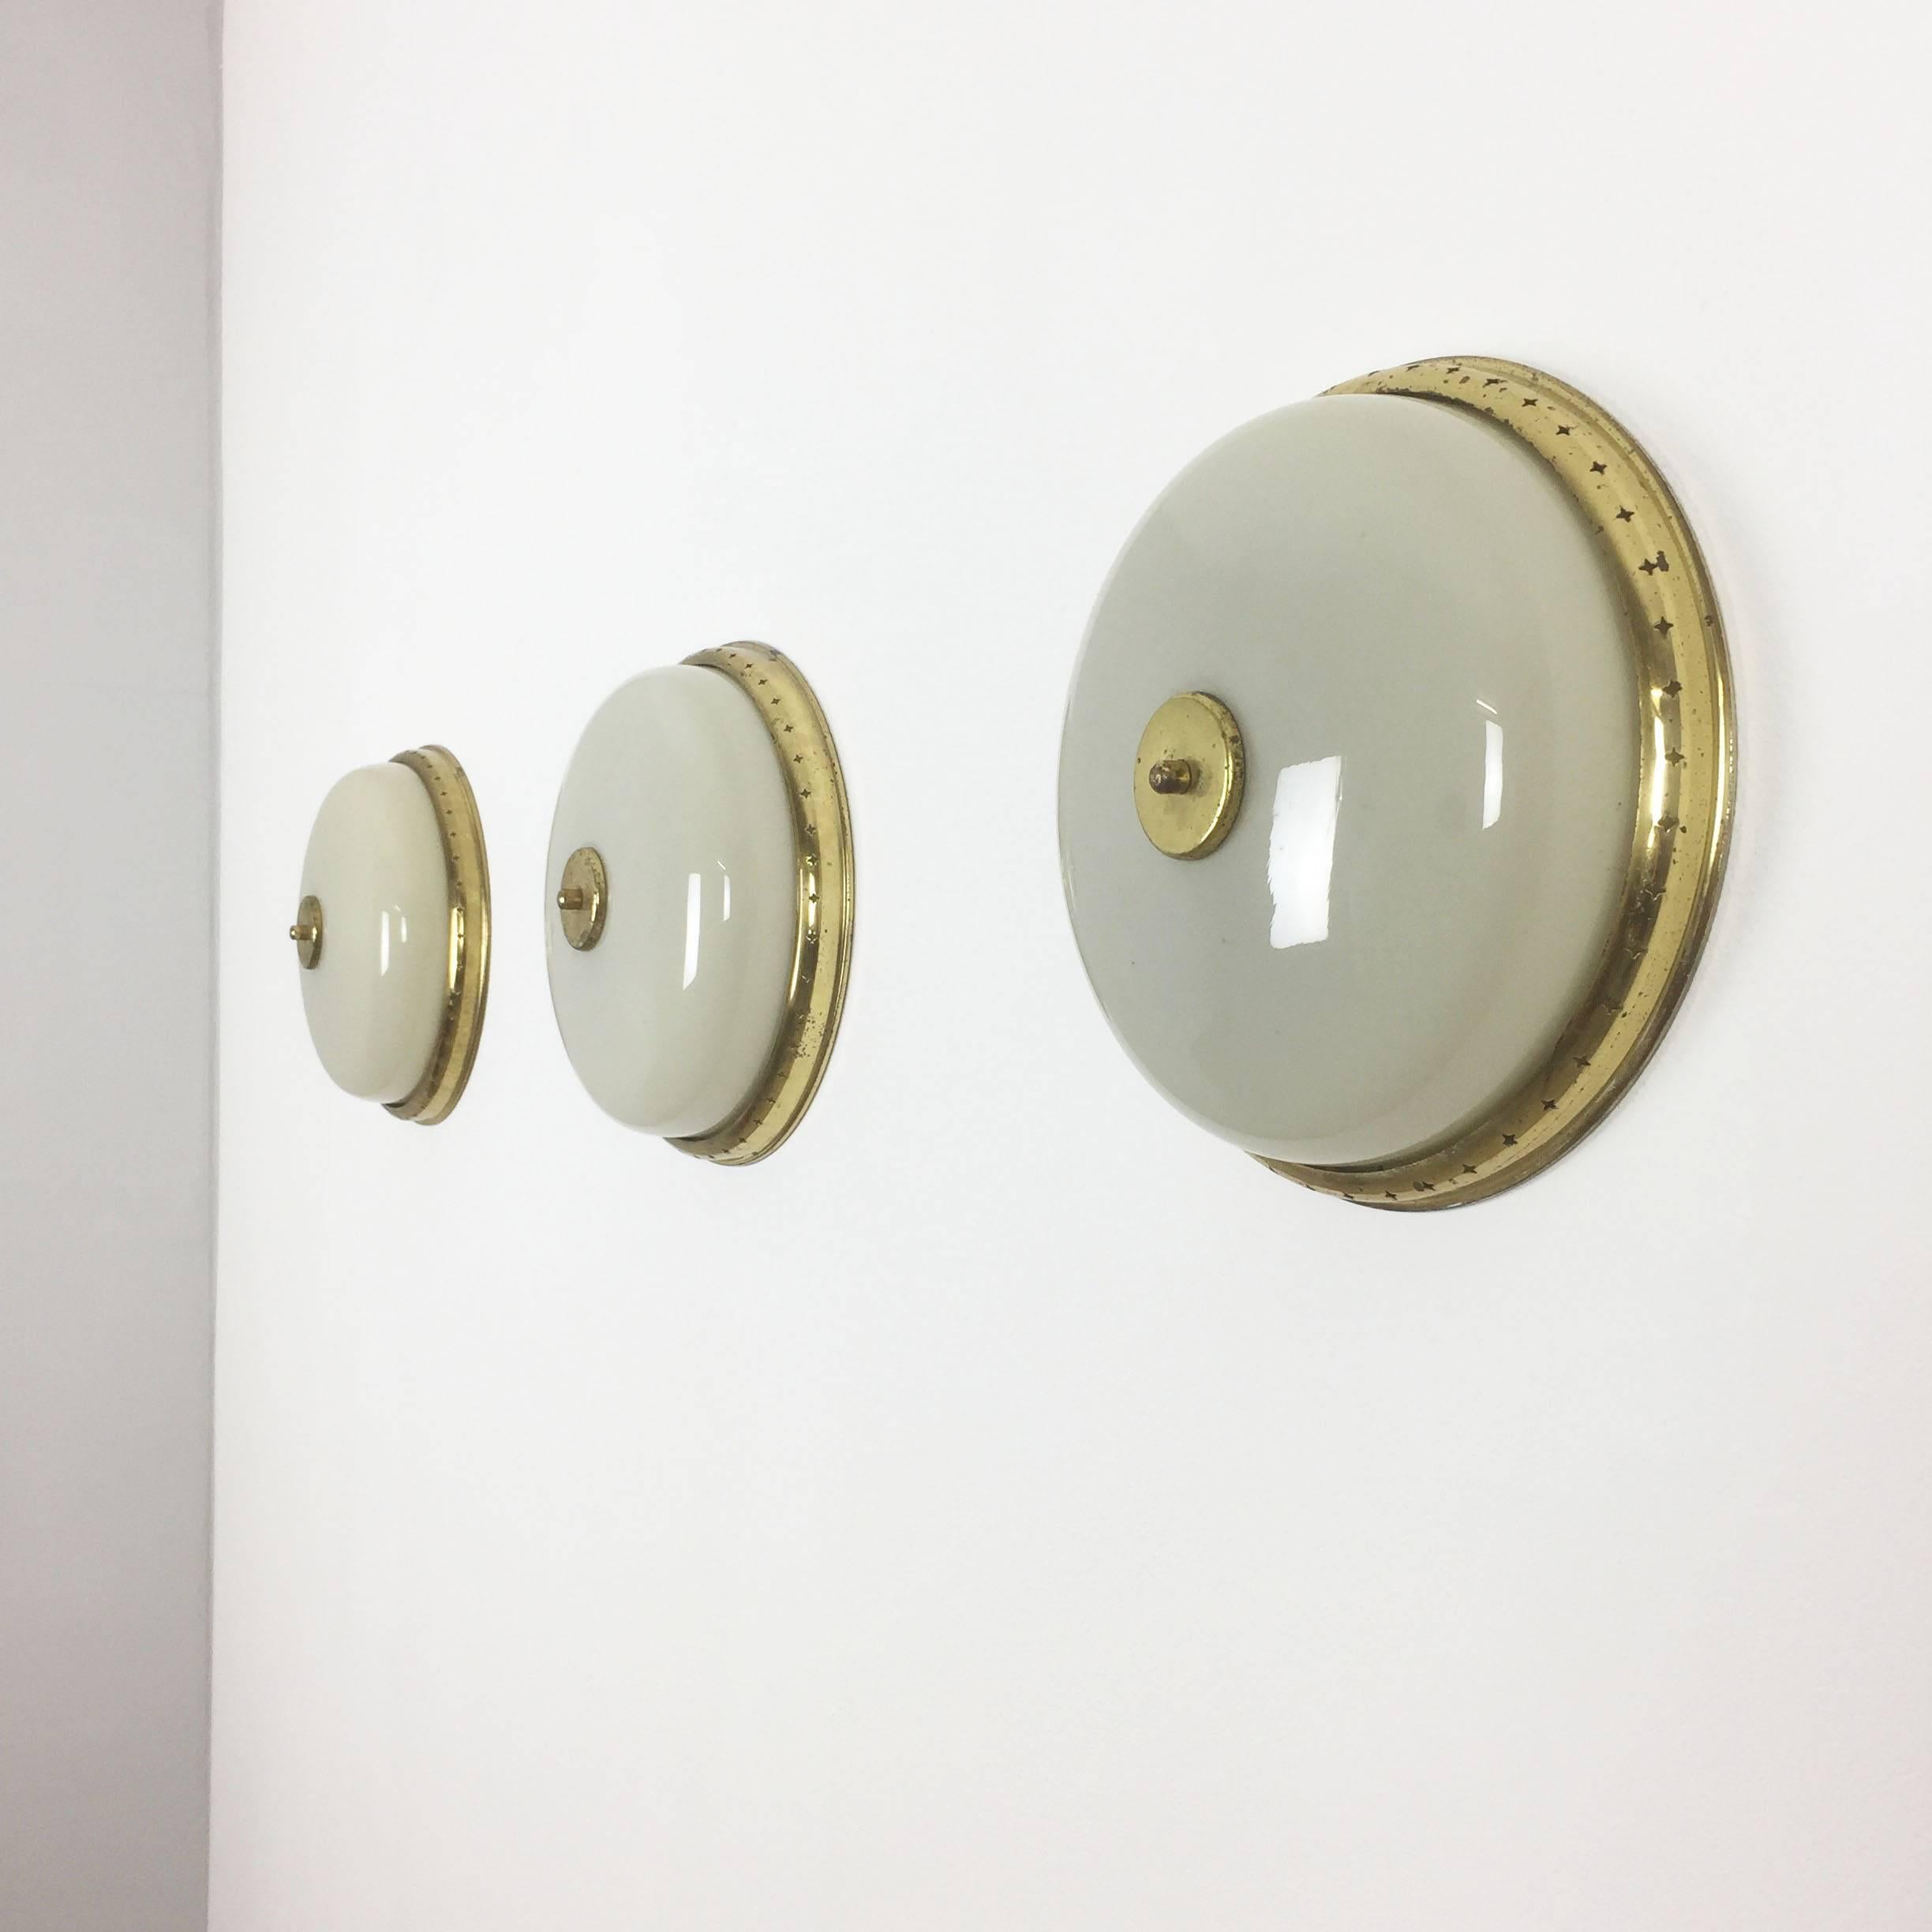 Mid-Century Modern Set of Three Modernist Metal, Brass and Glass Wall Light Sconces Made in Italy